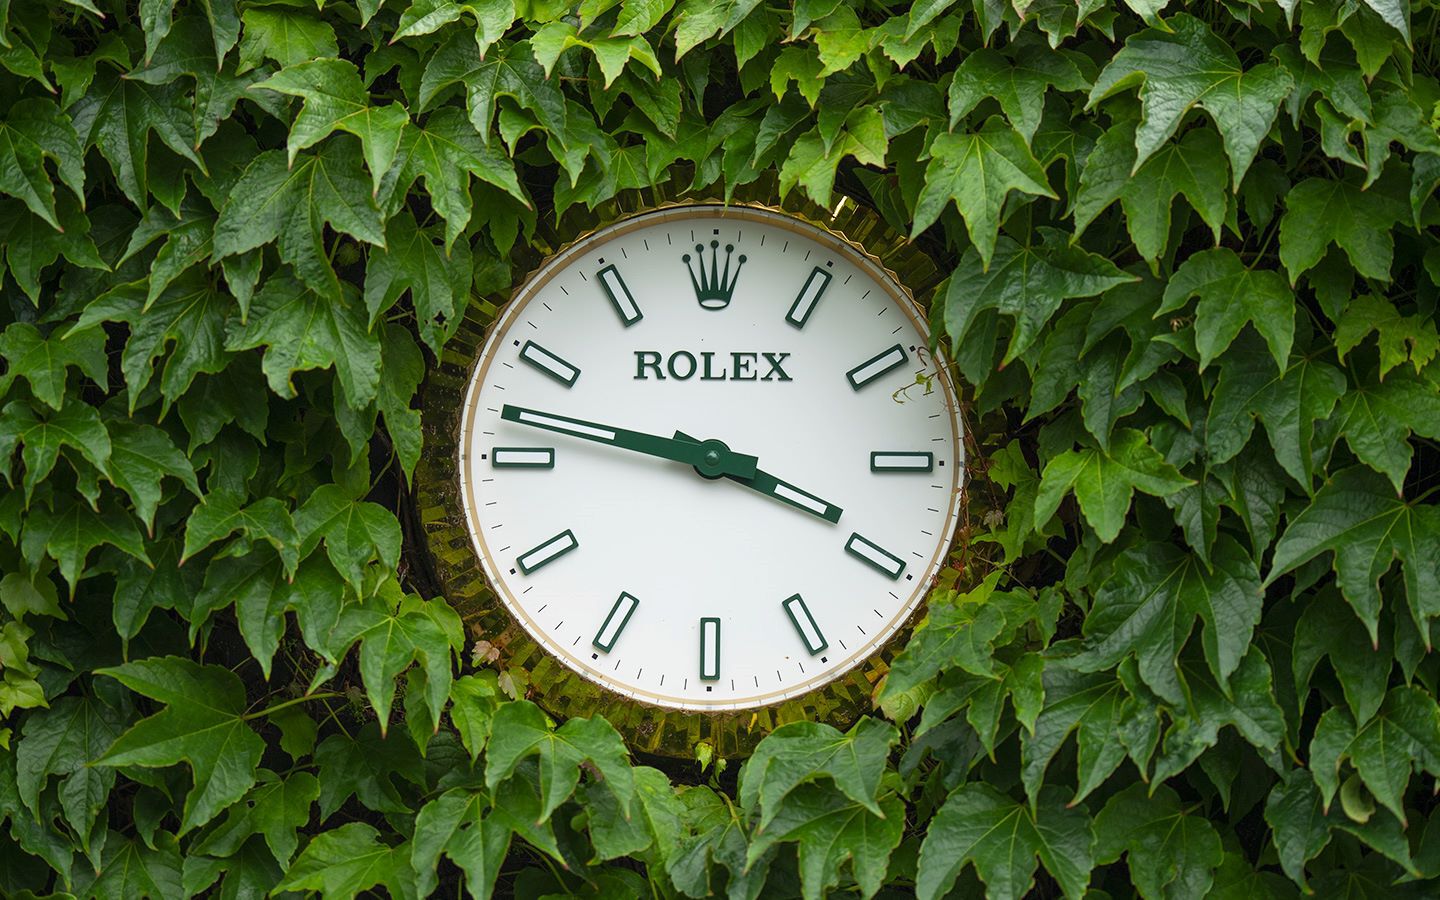 The iconic Rolex  clock at Wimbledon, surrounded by green leaves